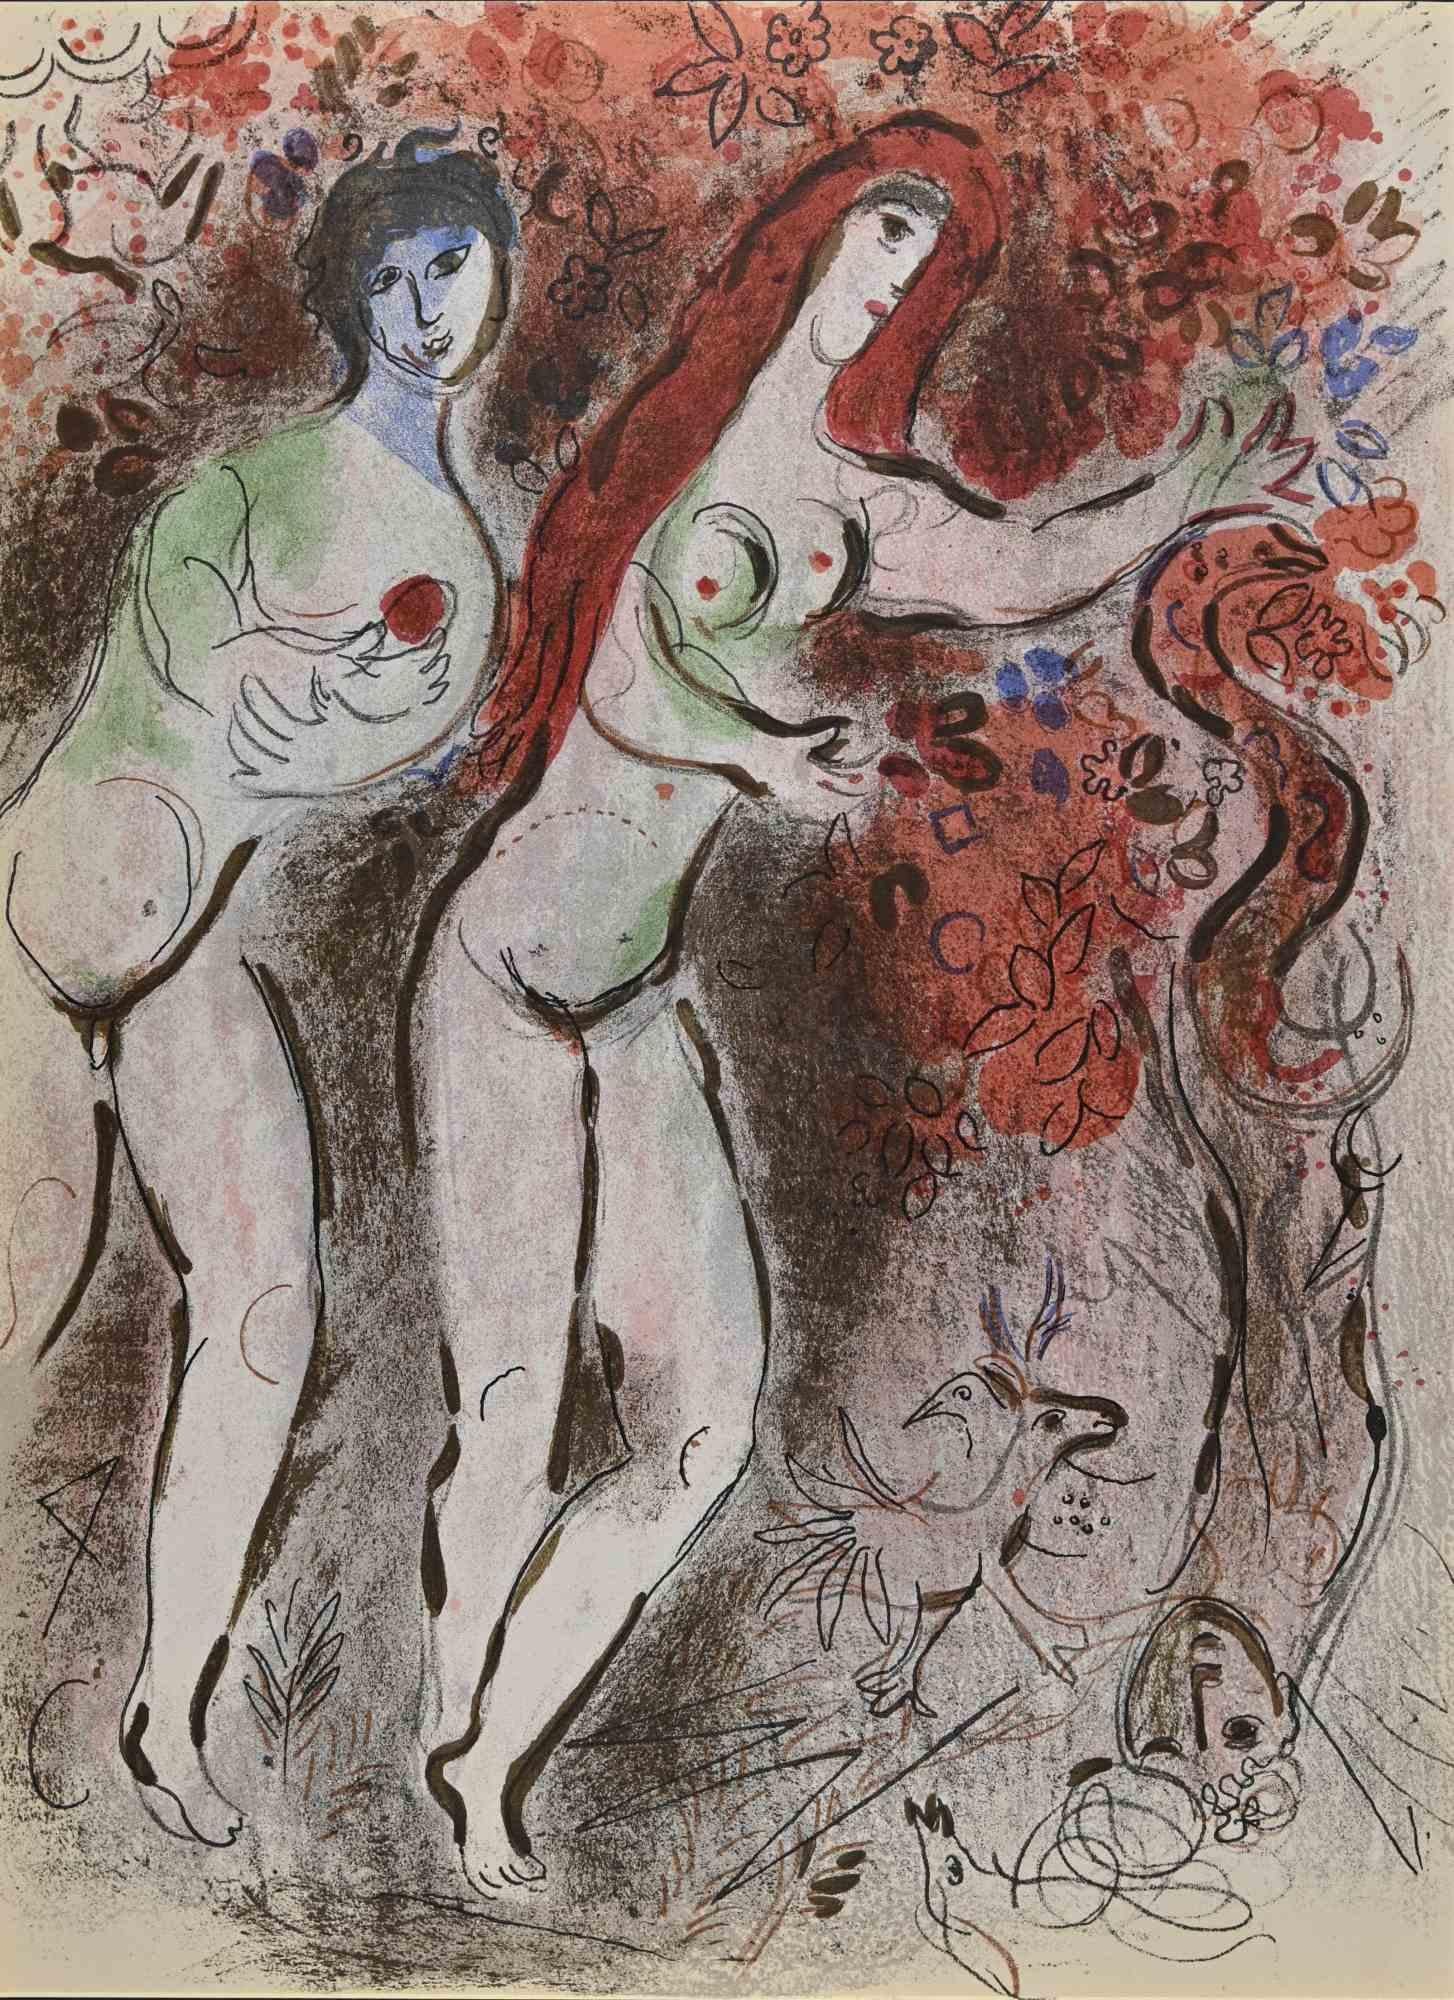 Adam, Eve and The Serpent is an artwork from the Series "The Bible", by Marc Chagall in 1960.

Mixed colored lithograph on brown-toned paper, no signature.

Edition of 6500 unsigned lithographs. Printed by Mourlot and published by Tériade,